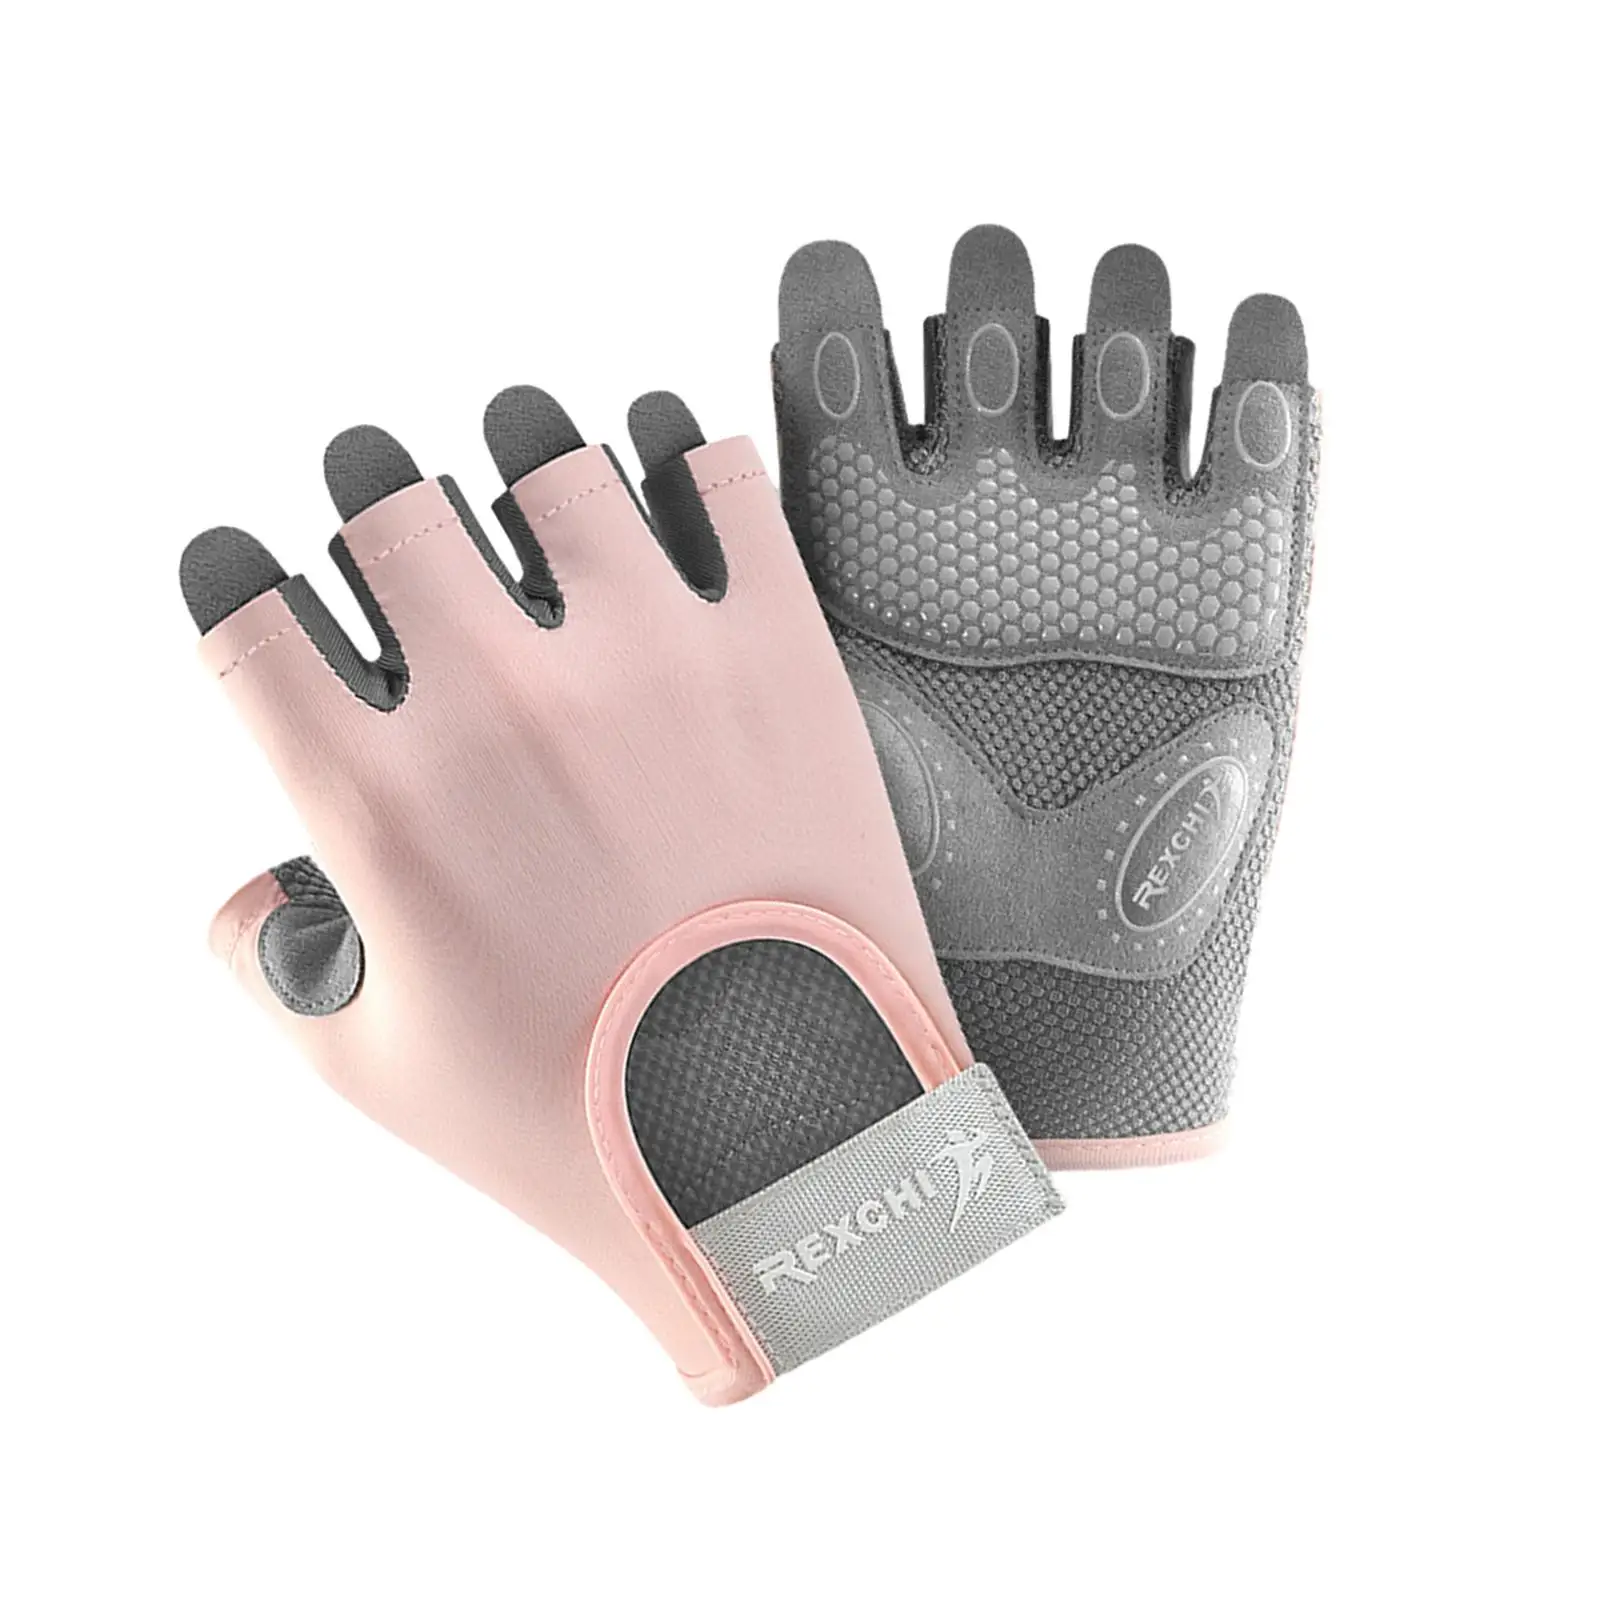 Cycling Bike Gloves Anti Slip Protective Palm Protection Fingerless Mittens